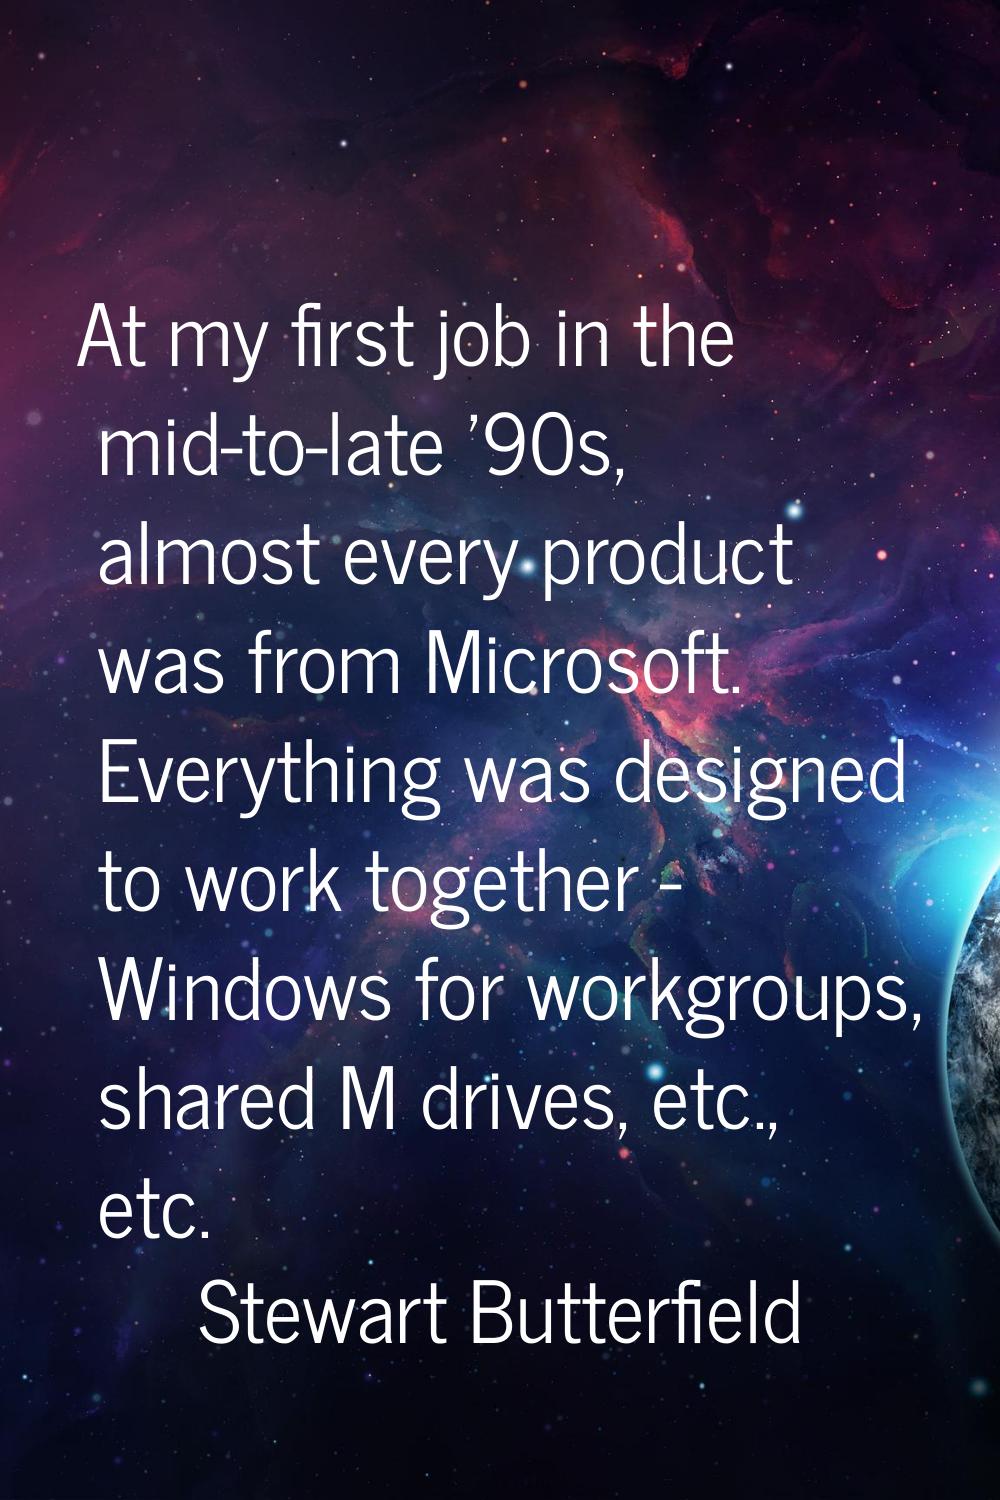 At my first job in the mid-to-late '90s, almost every product was from Microsoft. Everything was de